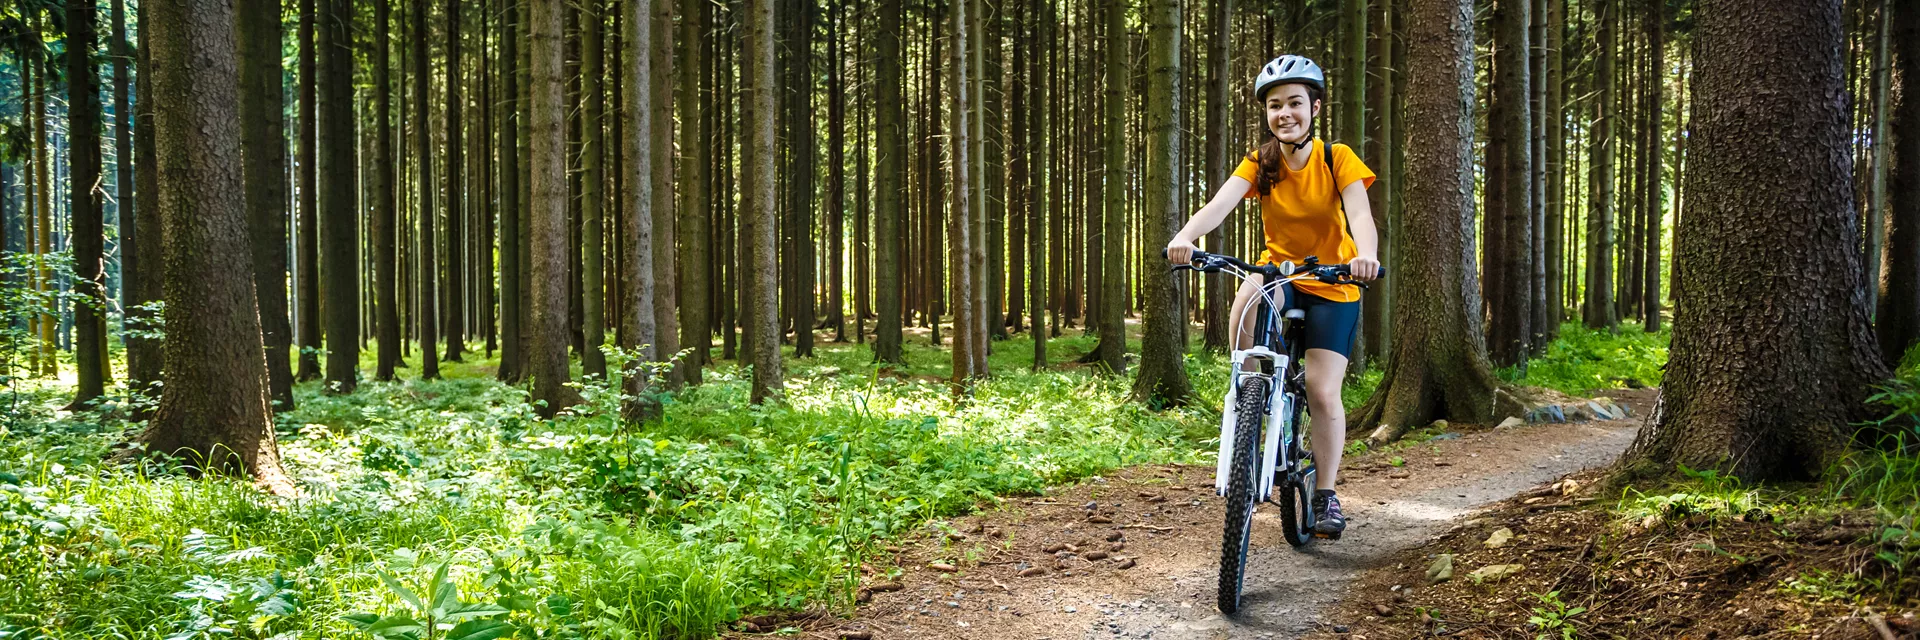 Young person riding bike in forest